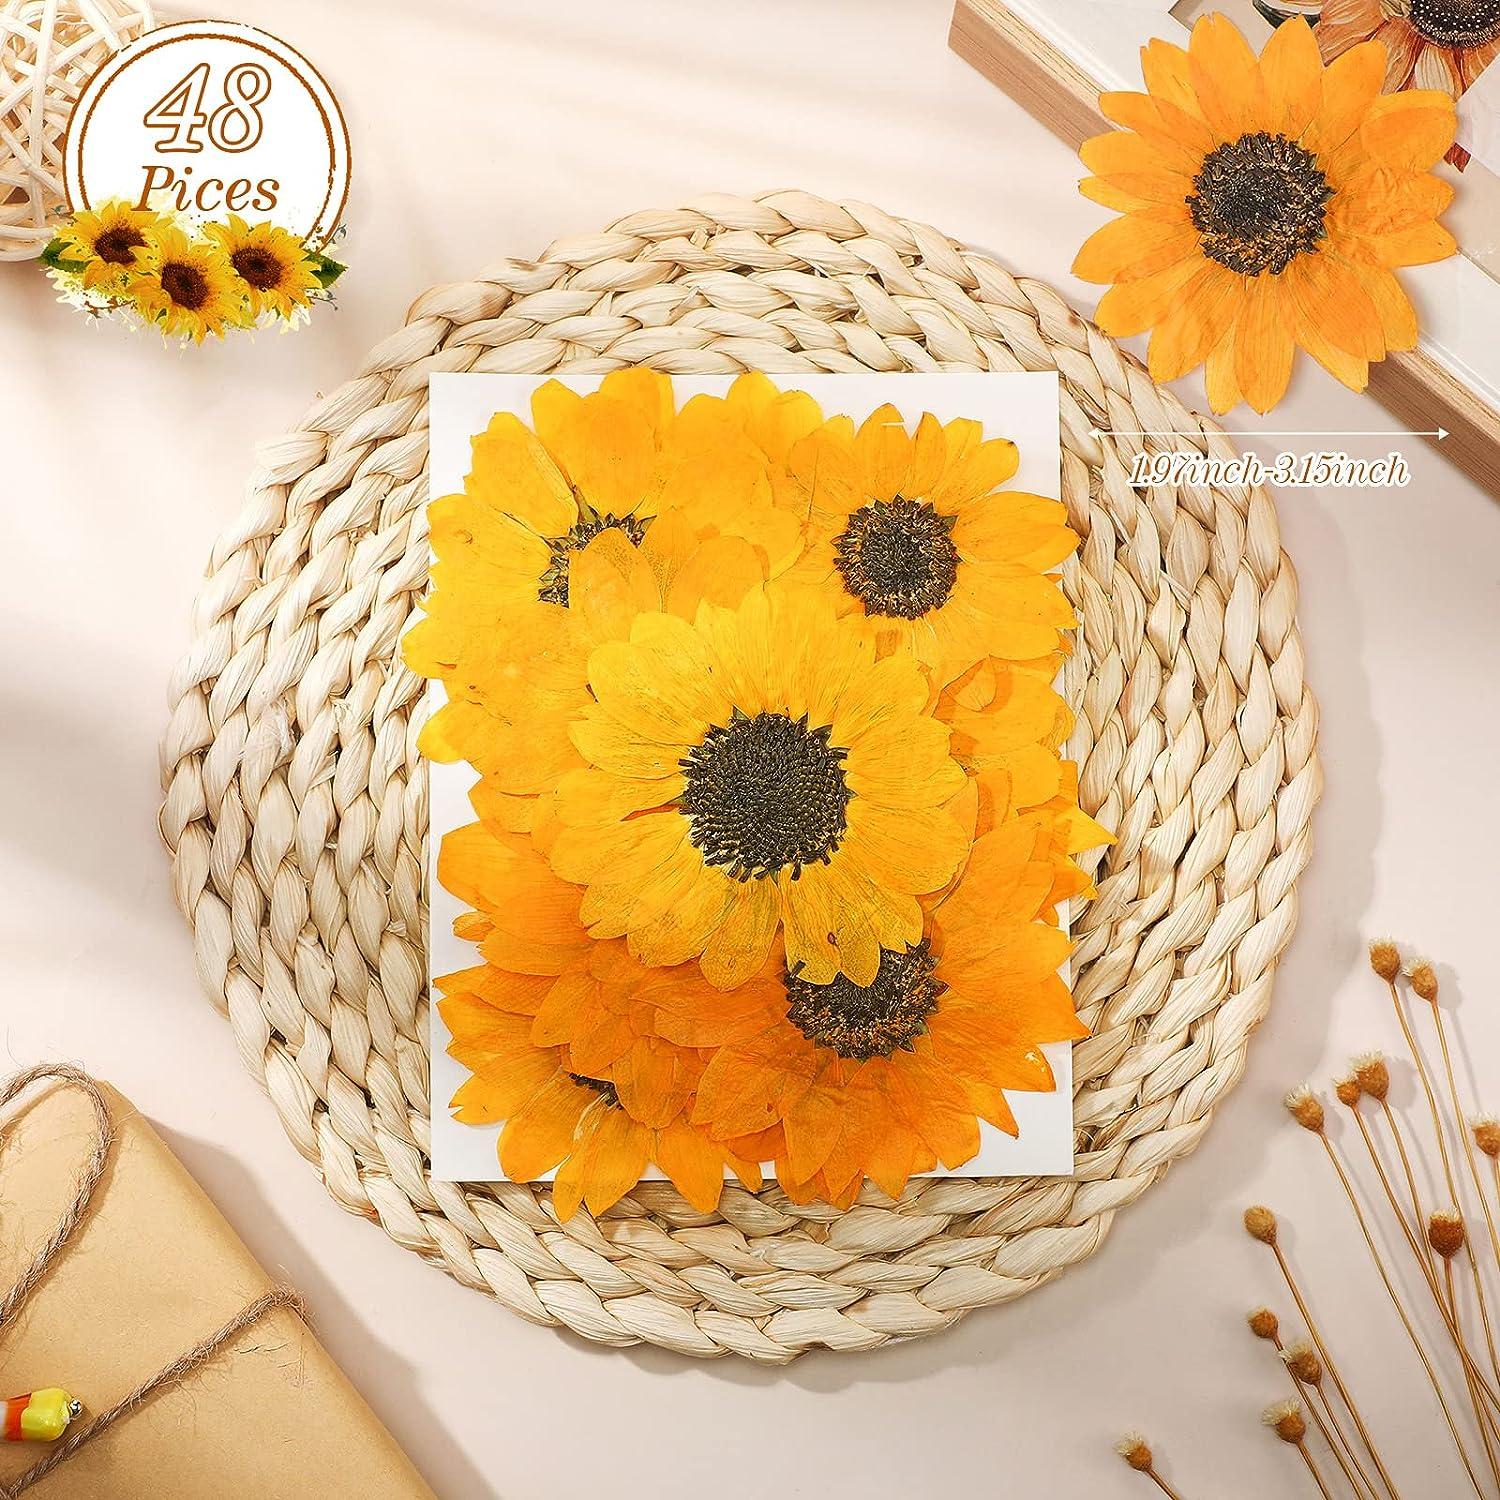 Daisy Dried Flower Natural Sunflower DIY Epoxi Resin Mold Home